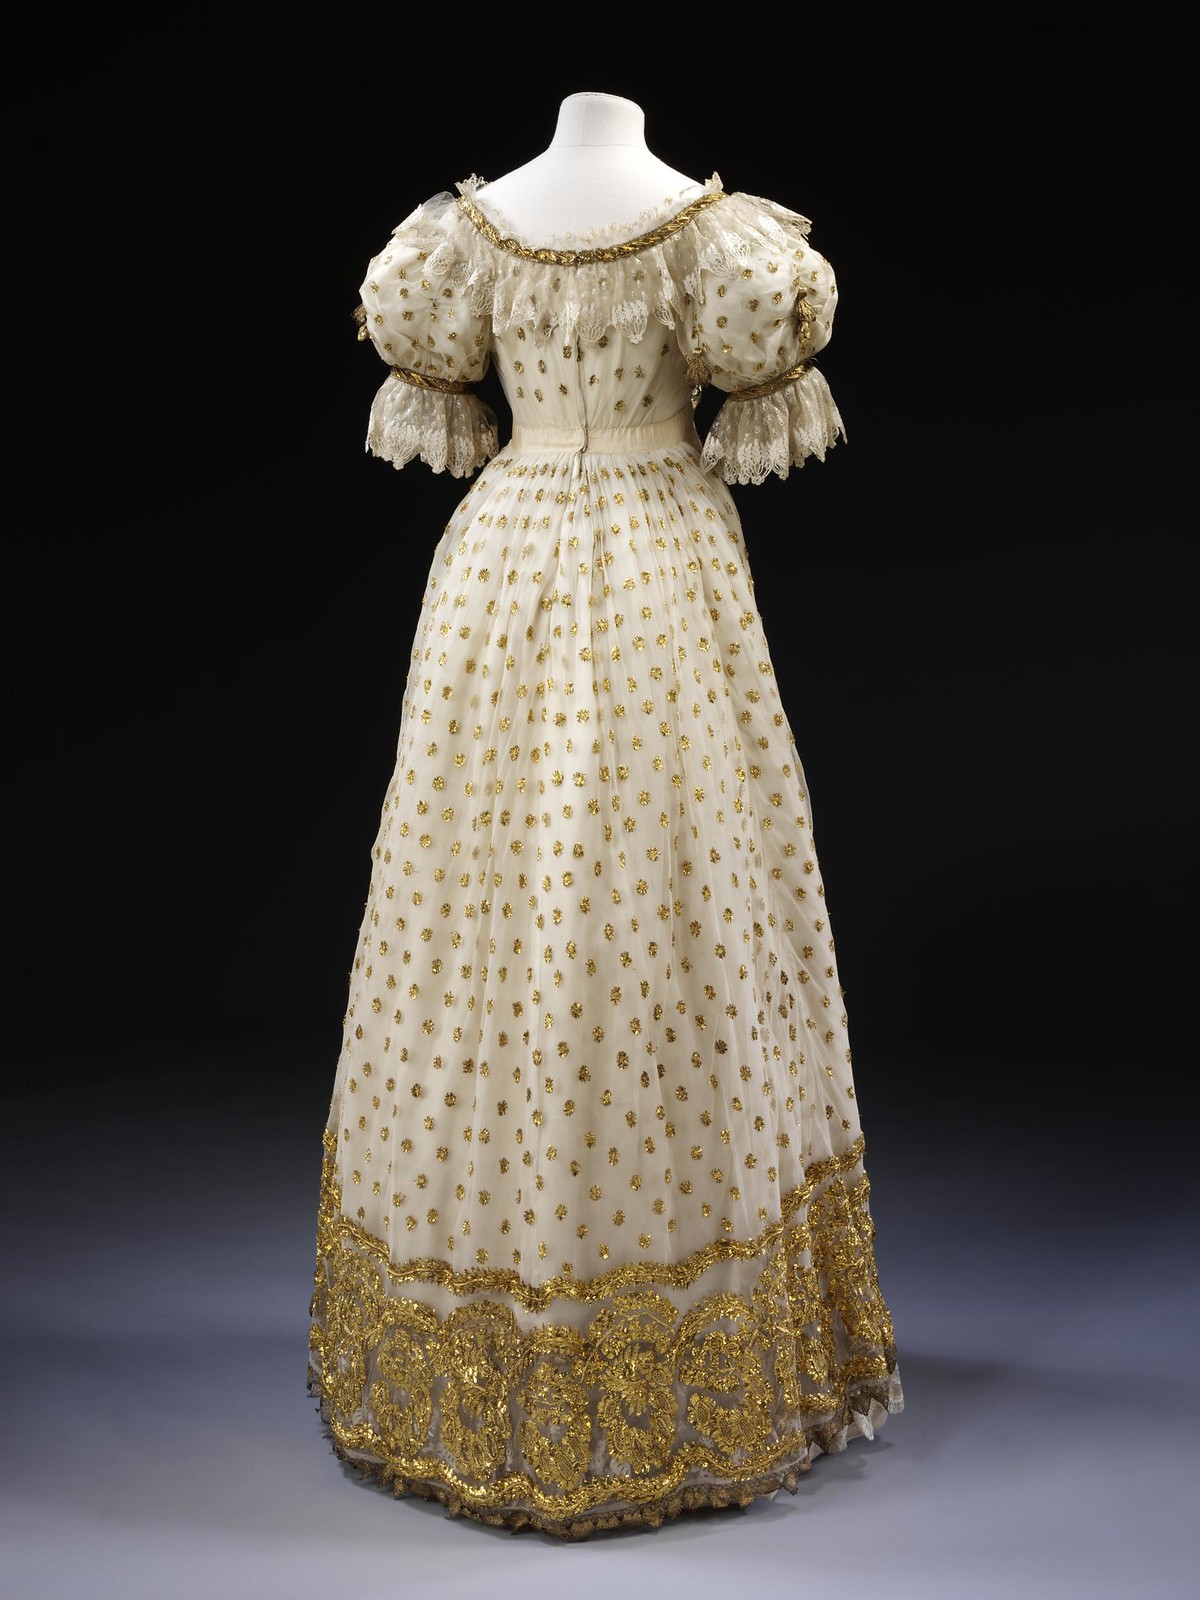 1820 Ball gown. British. Silk satin and silk embroidered with metal. © Victoria and Albert Museum, London